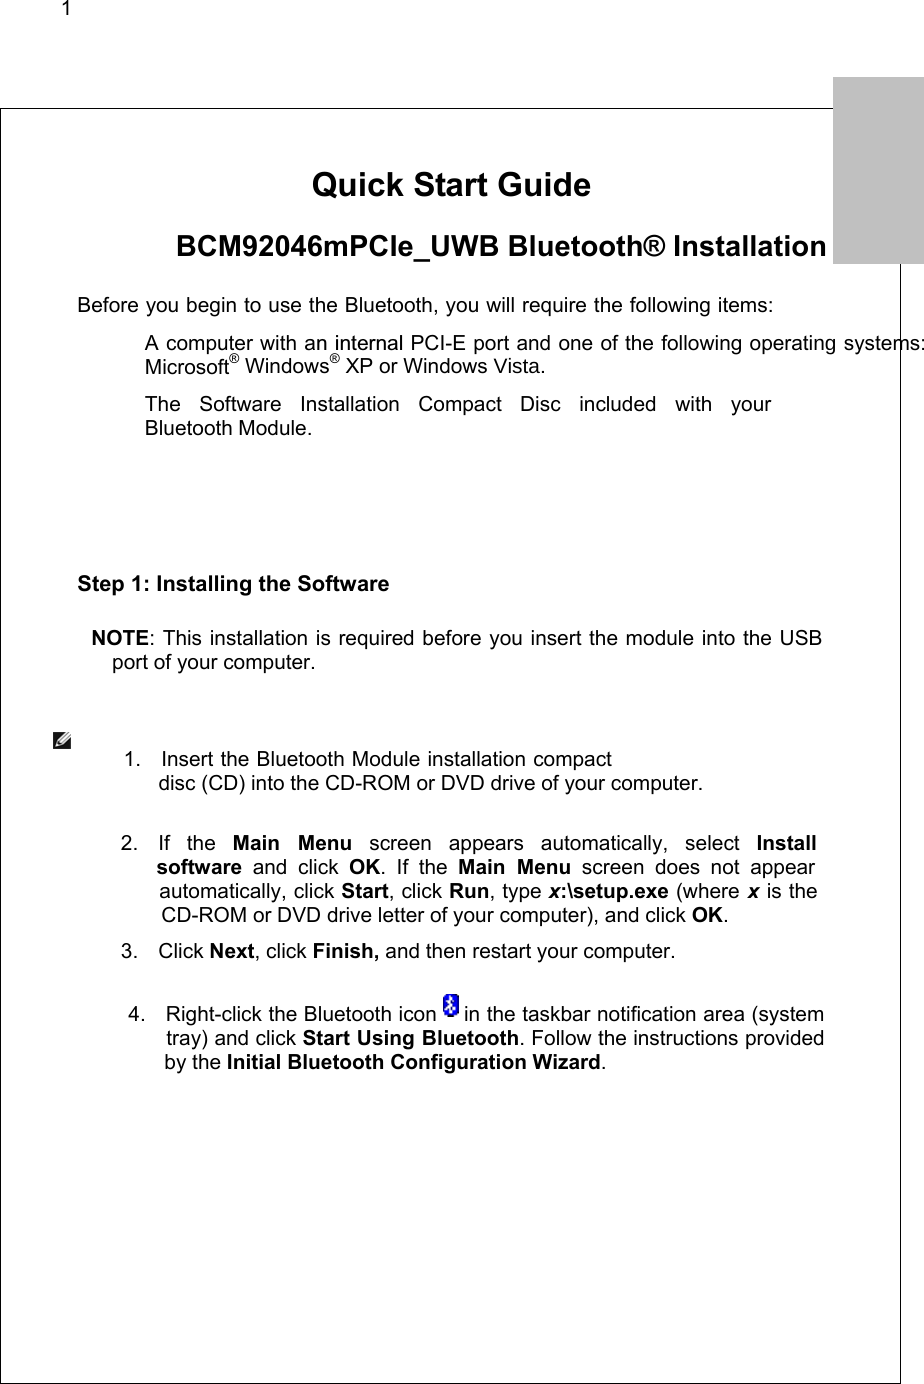 1        Quick Start Guide   BCM92046mPCIe_UWB Bluetooth® Installation   Before you begin to use the Bluetooth, you will require the following items:   A computer with an internal PCI-E port and one of the following operating systems: Microsoft® Windows® XP or Windows Vista.   The Software Installation Compact Disc included with your  Bluetooth Module.   Step 1: Installing the Software  NOTE: This installation is required before you insert the module into the USB port of your computer.                                           1. Insert the Bluetooth Module installation compact                                                                   disc (CD) into the CD-ROM or DVD drive of your computer.                                        2. If the Main Menu screen appears automatically, select Install                                                            software and click OK. If the Main Menu screen does not appear                                                  automatically, click Start, click Run, type x:\setup.exe (where x is the                                                             CD-ROM or DVD drive letter of your computer), and click OK.                  3. Click Next, click Finish, and then restart your computer.                                                                                                      4.  Right-click the Bluetooth icon   in the taskbar notification area (system                                                  tray) and click Start Using Bluetooth. Follow the instructions provided                                                       by the Initial Bluetooth Configuration Wizard.   1.           ENGLIH  